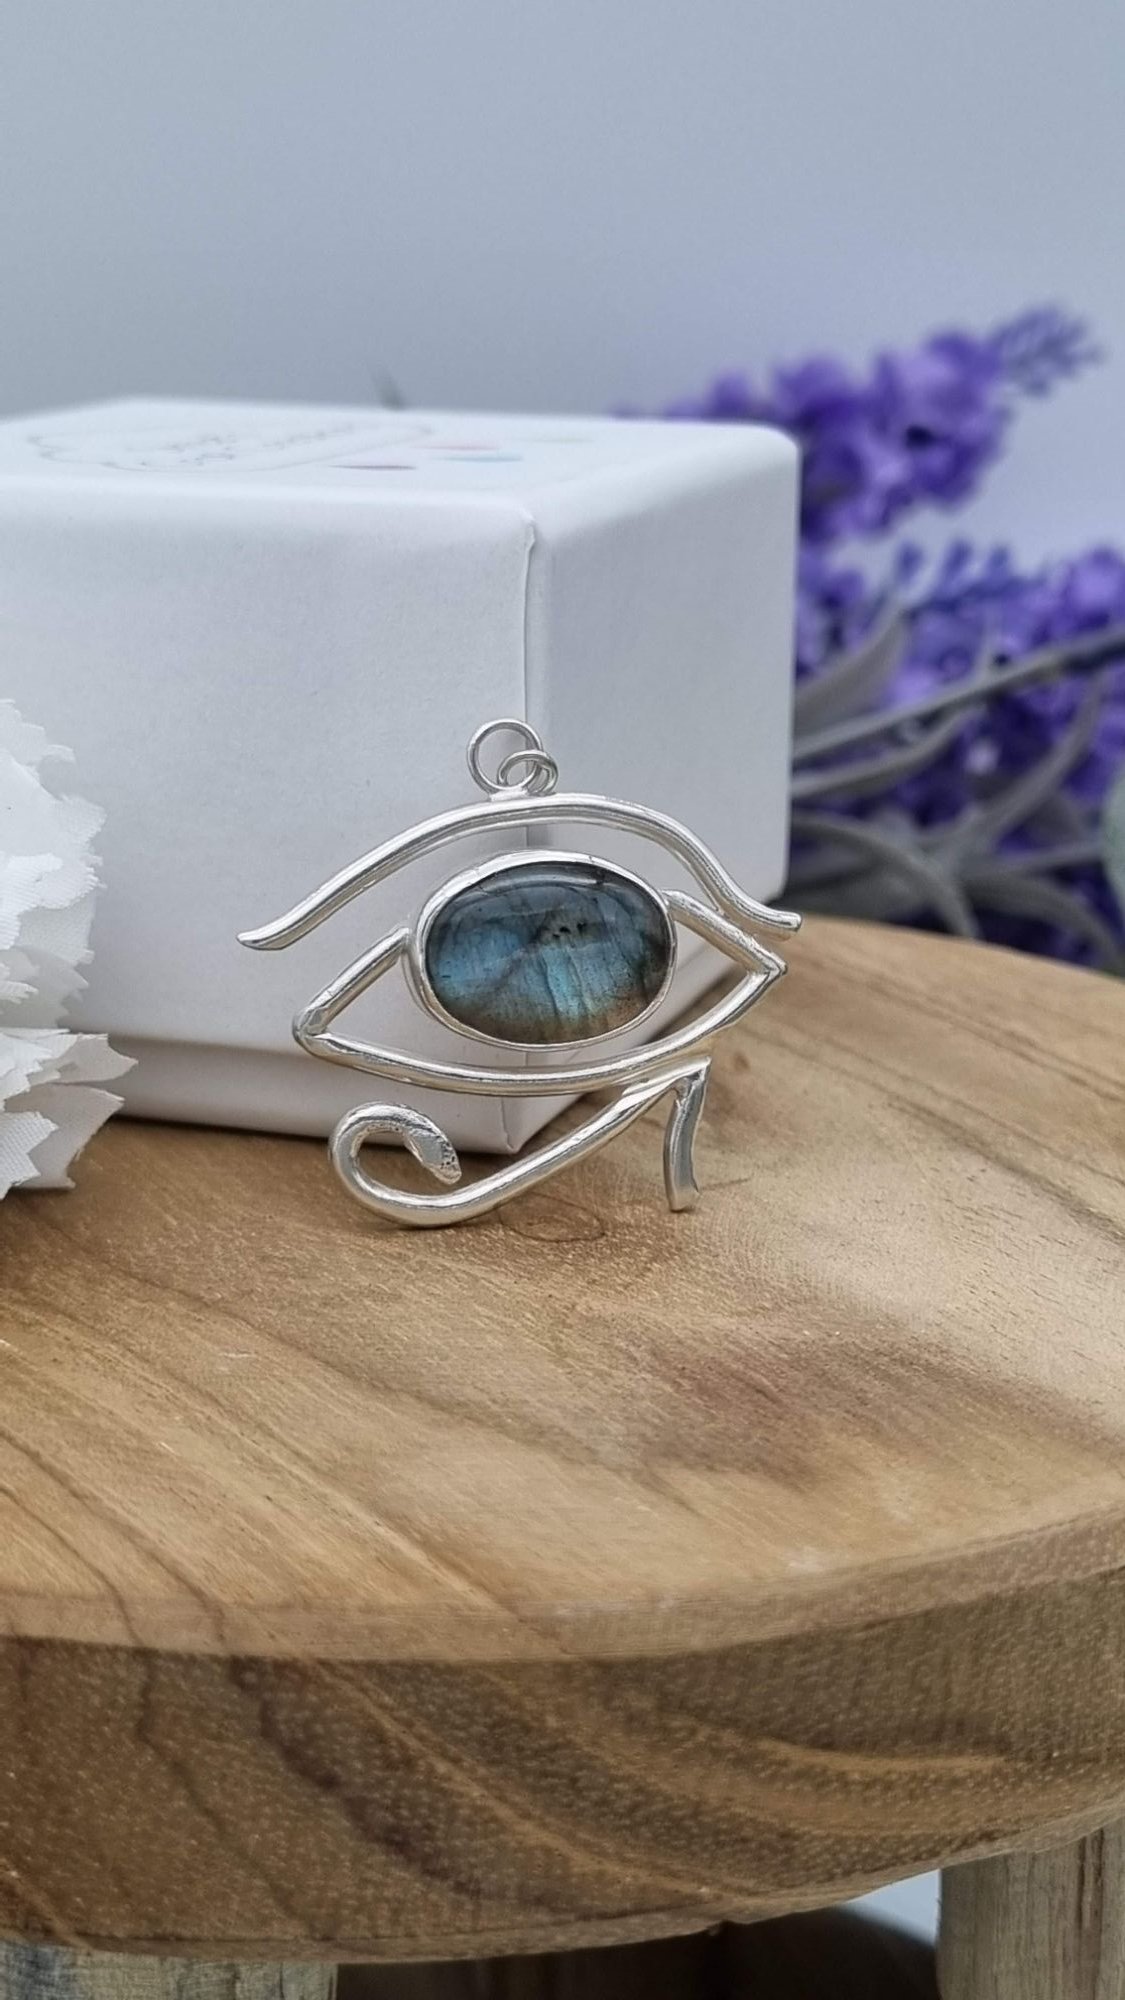 Eye of Horus design necklace, handmade from recycled sterling silver and set with a Labradorite gemstone